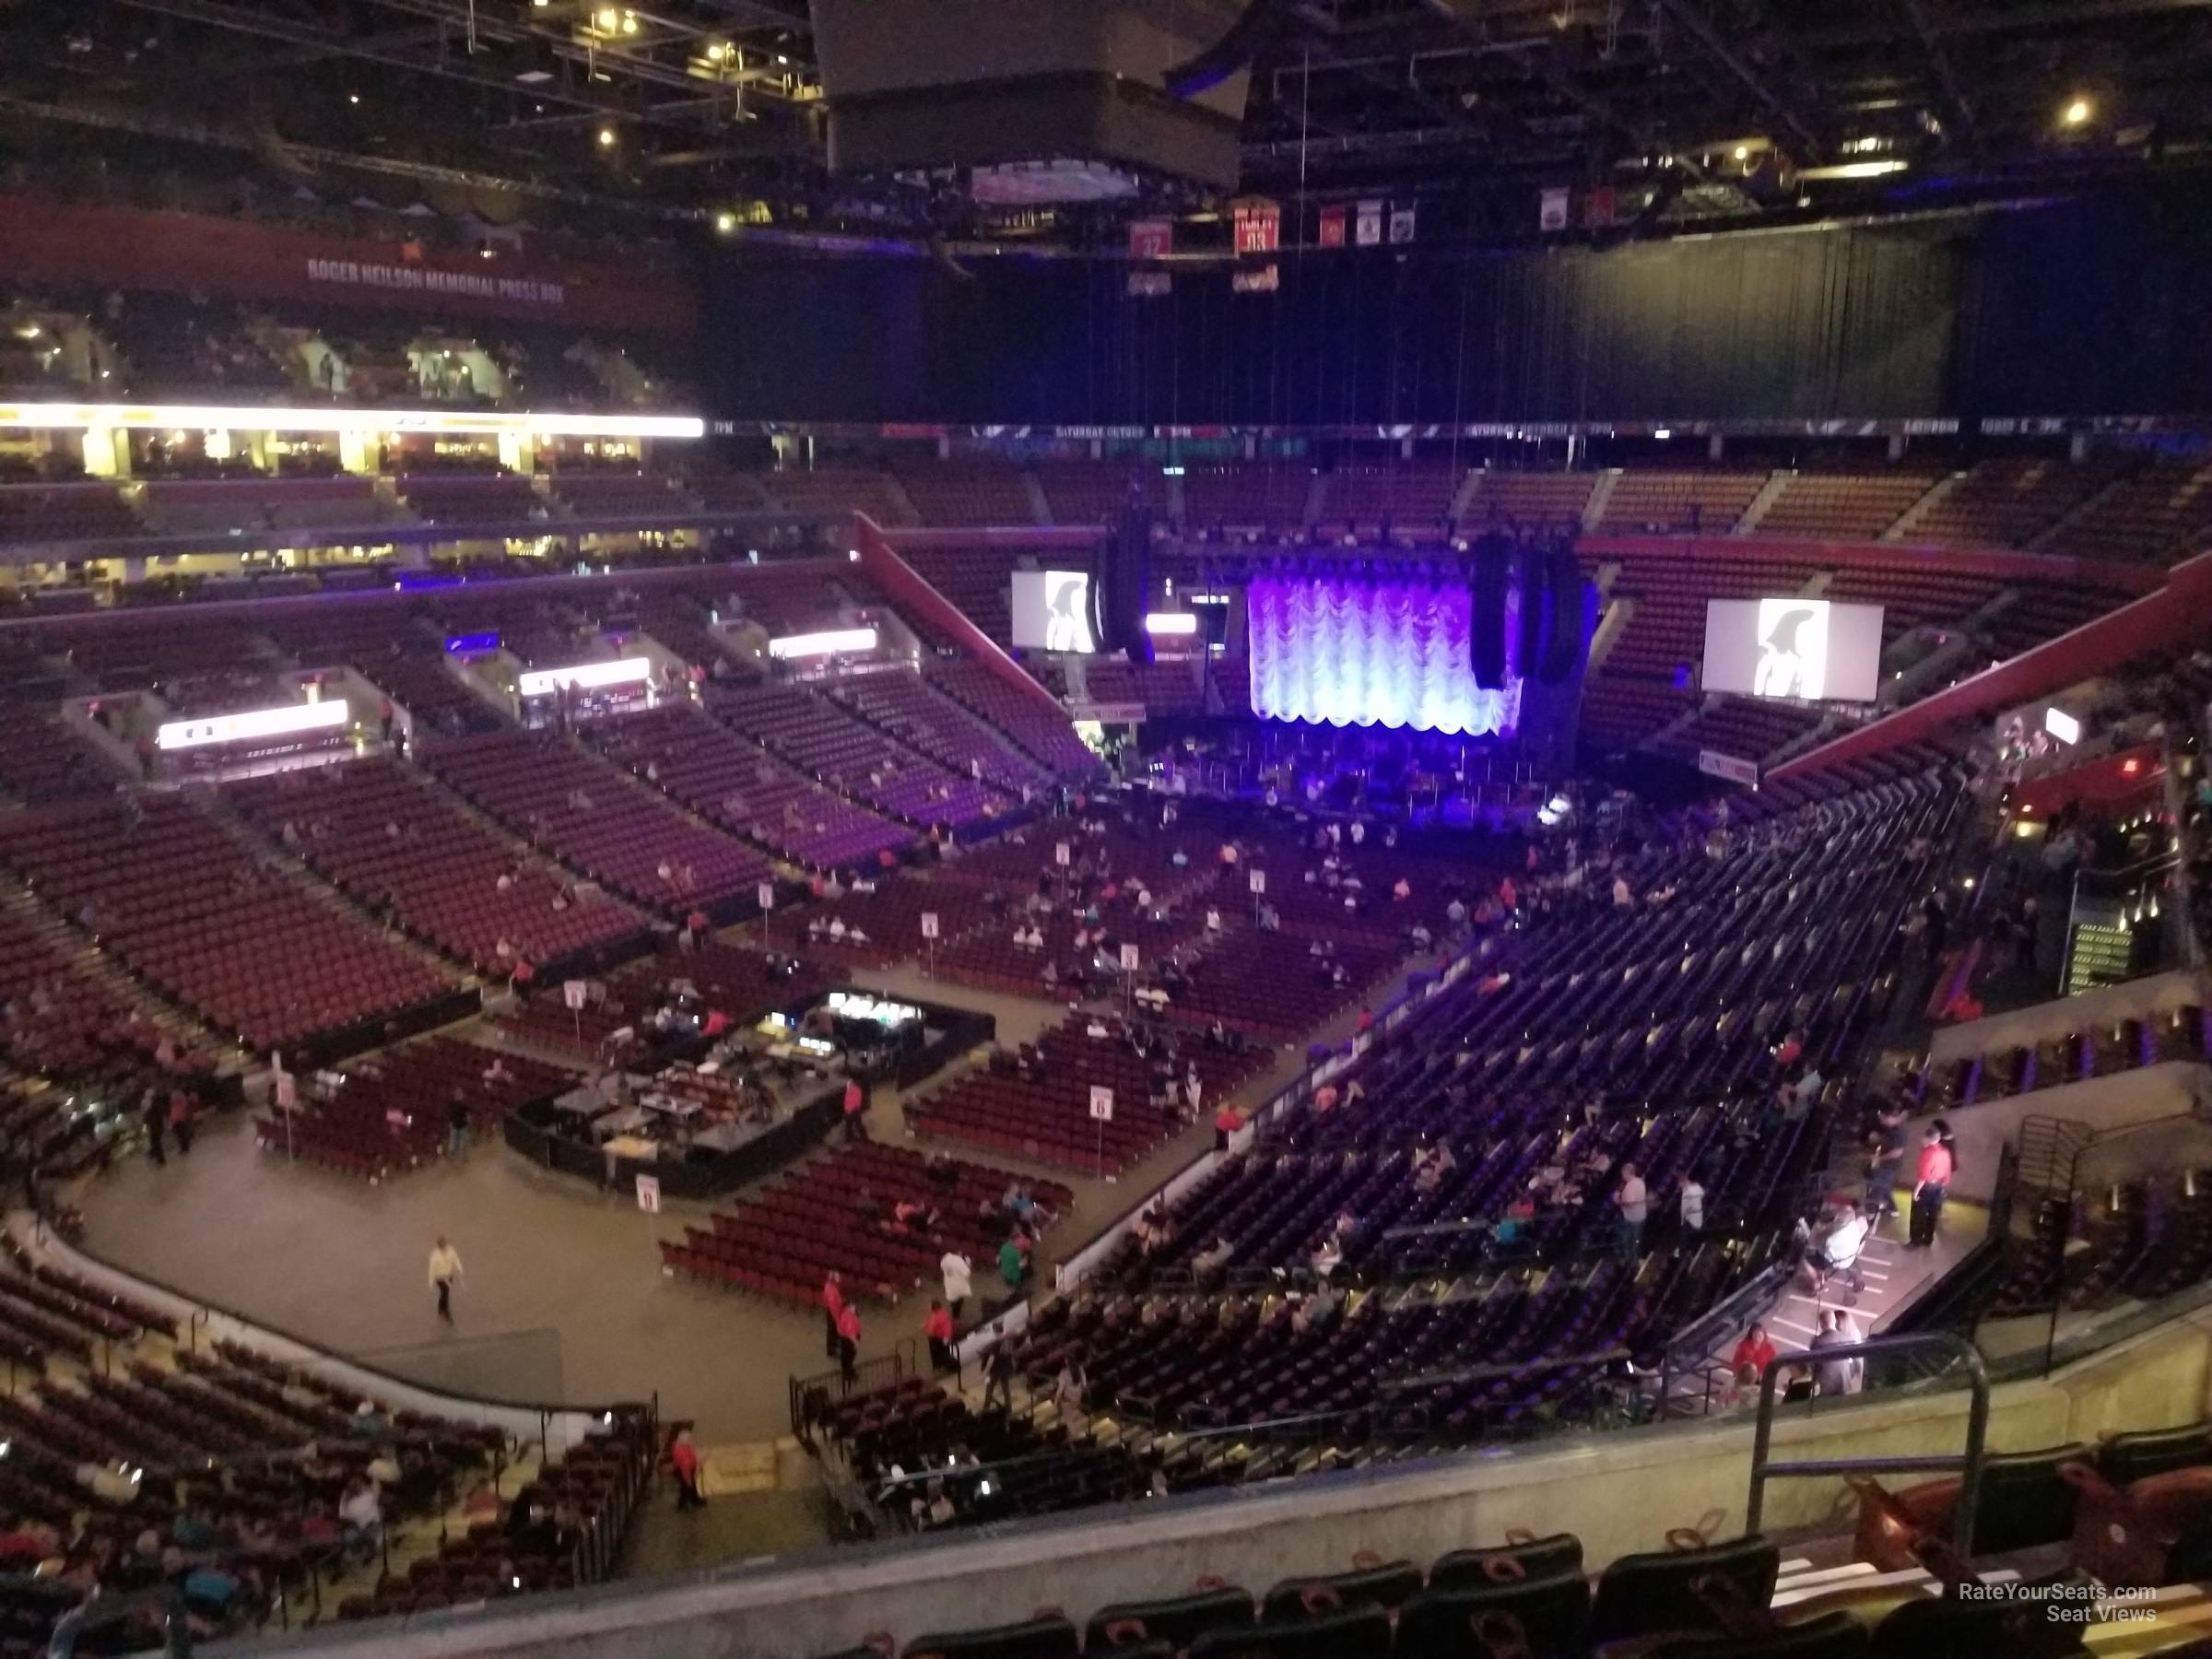 club c6, row 6 seat view  for concert - amerant bank arena